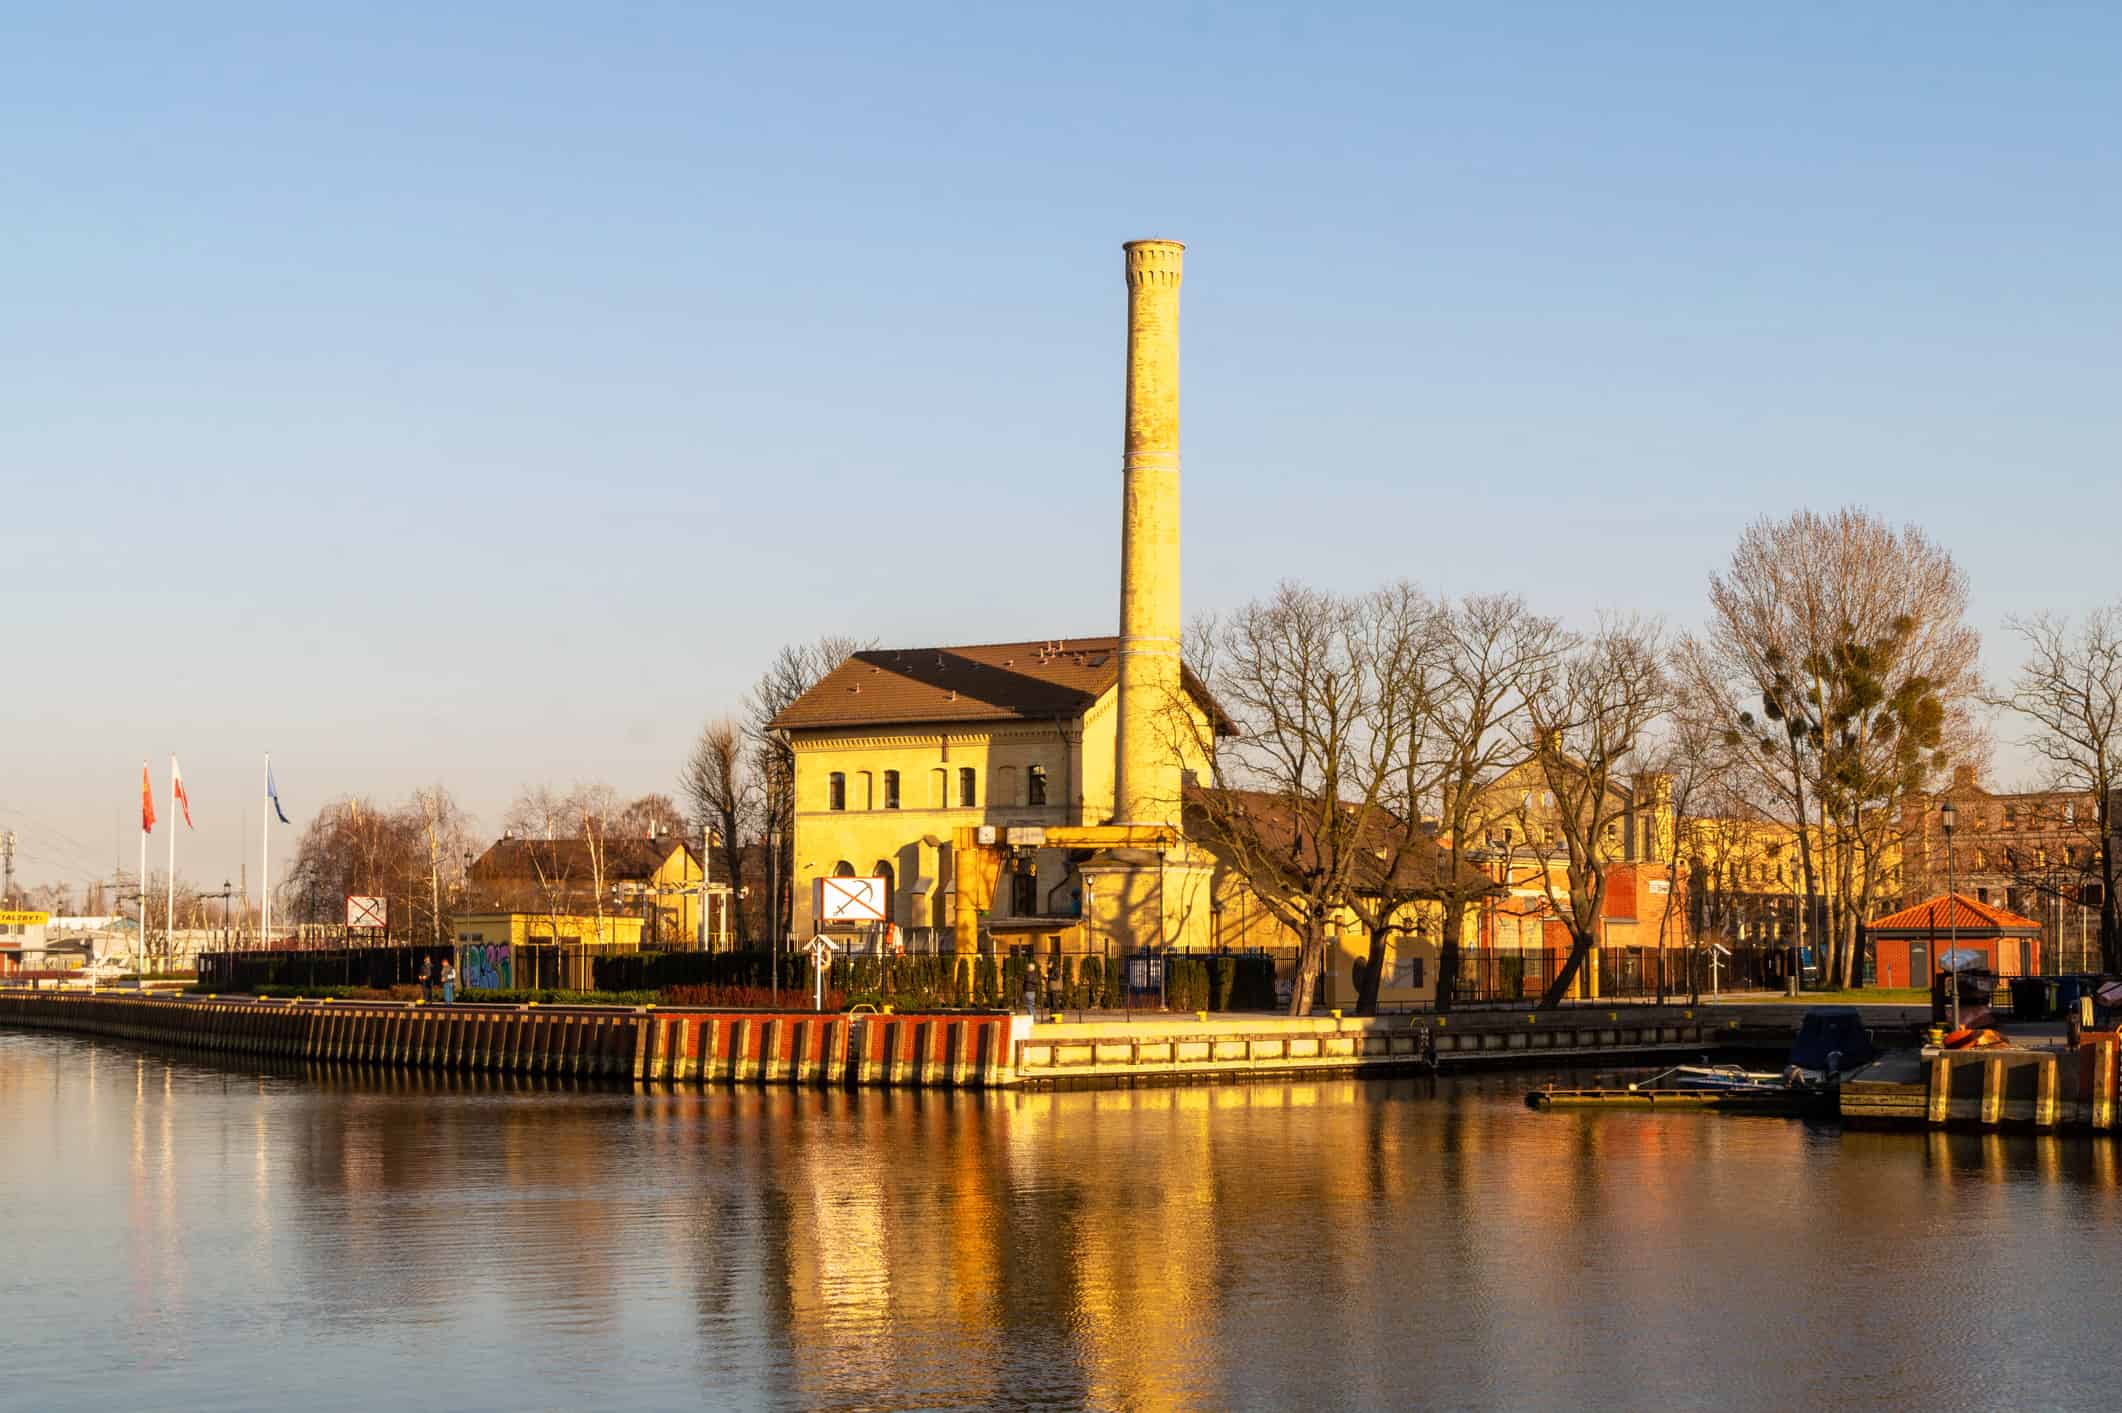 Old brewery on the canal